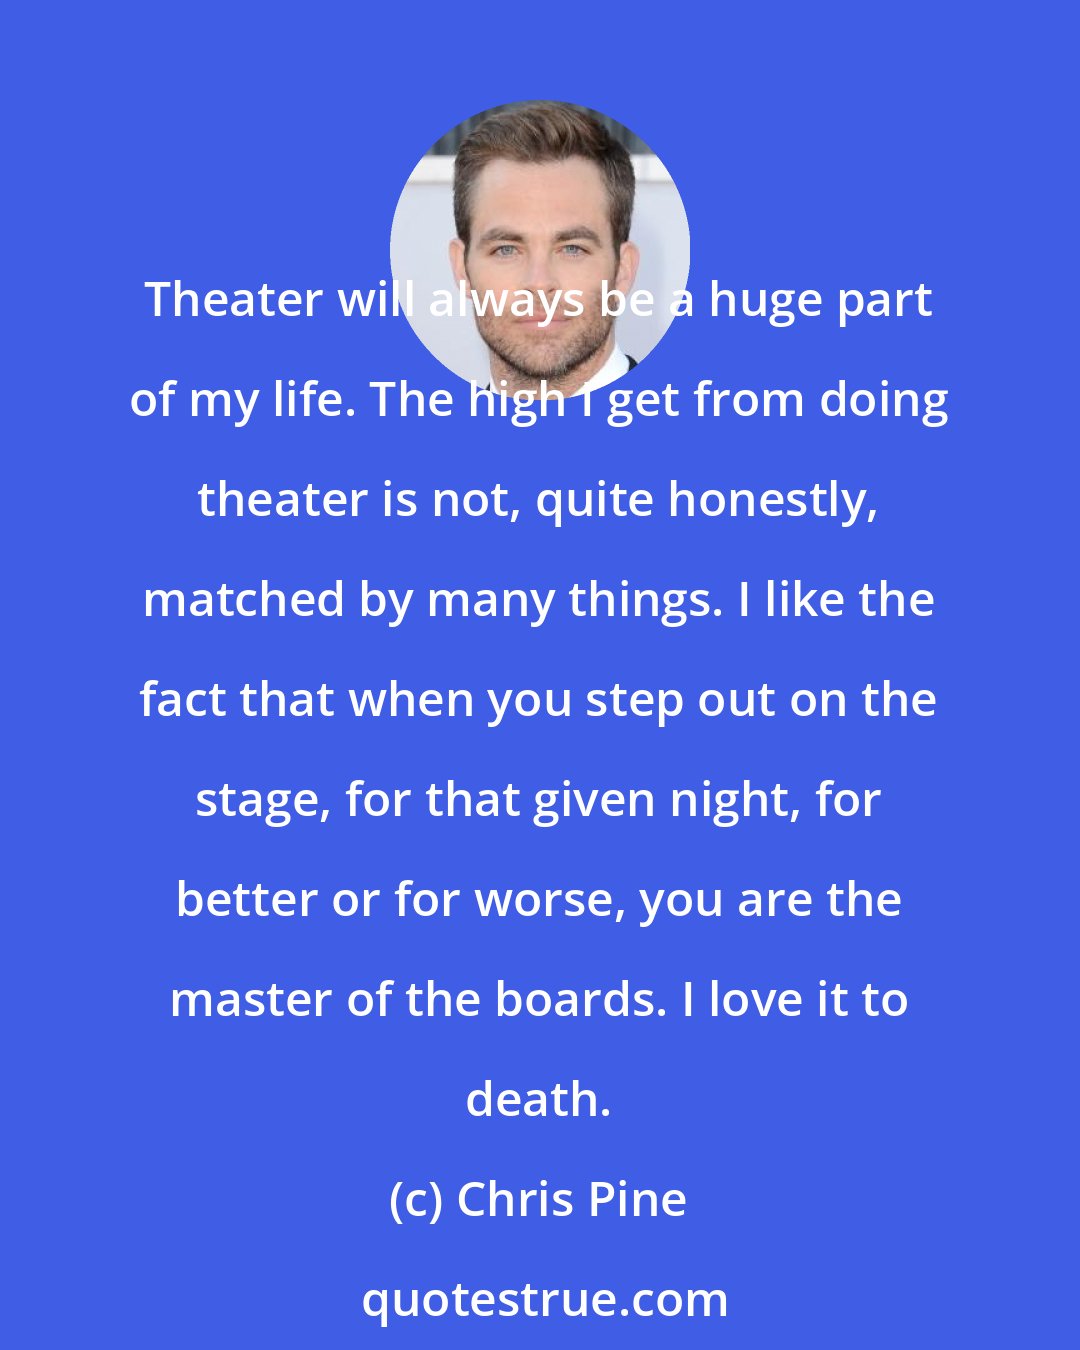 Chris Pine: Theater will always be a huge part of my life. The high I get from doing theater is not, quite honestly, matched by many things. I like the fact that when you step out on the stage, for that given night, for better or for worse, you are the master of the boards. I love it to death.